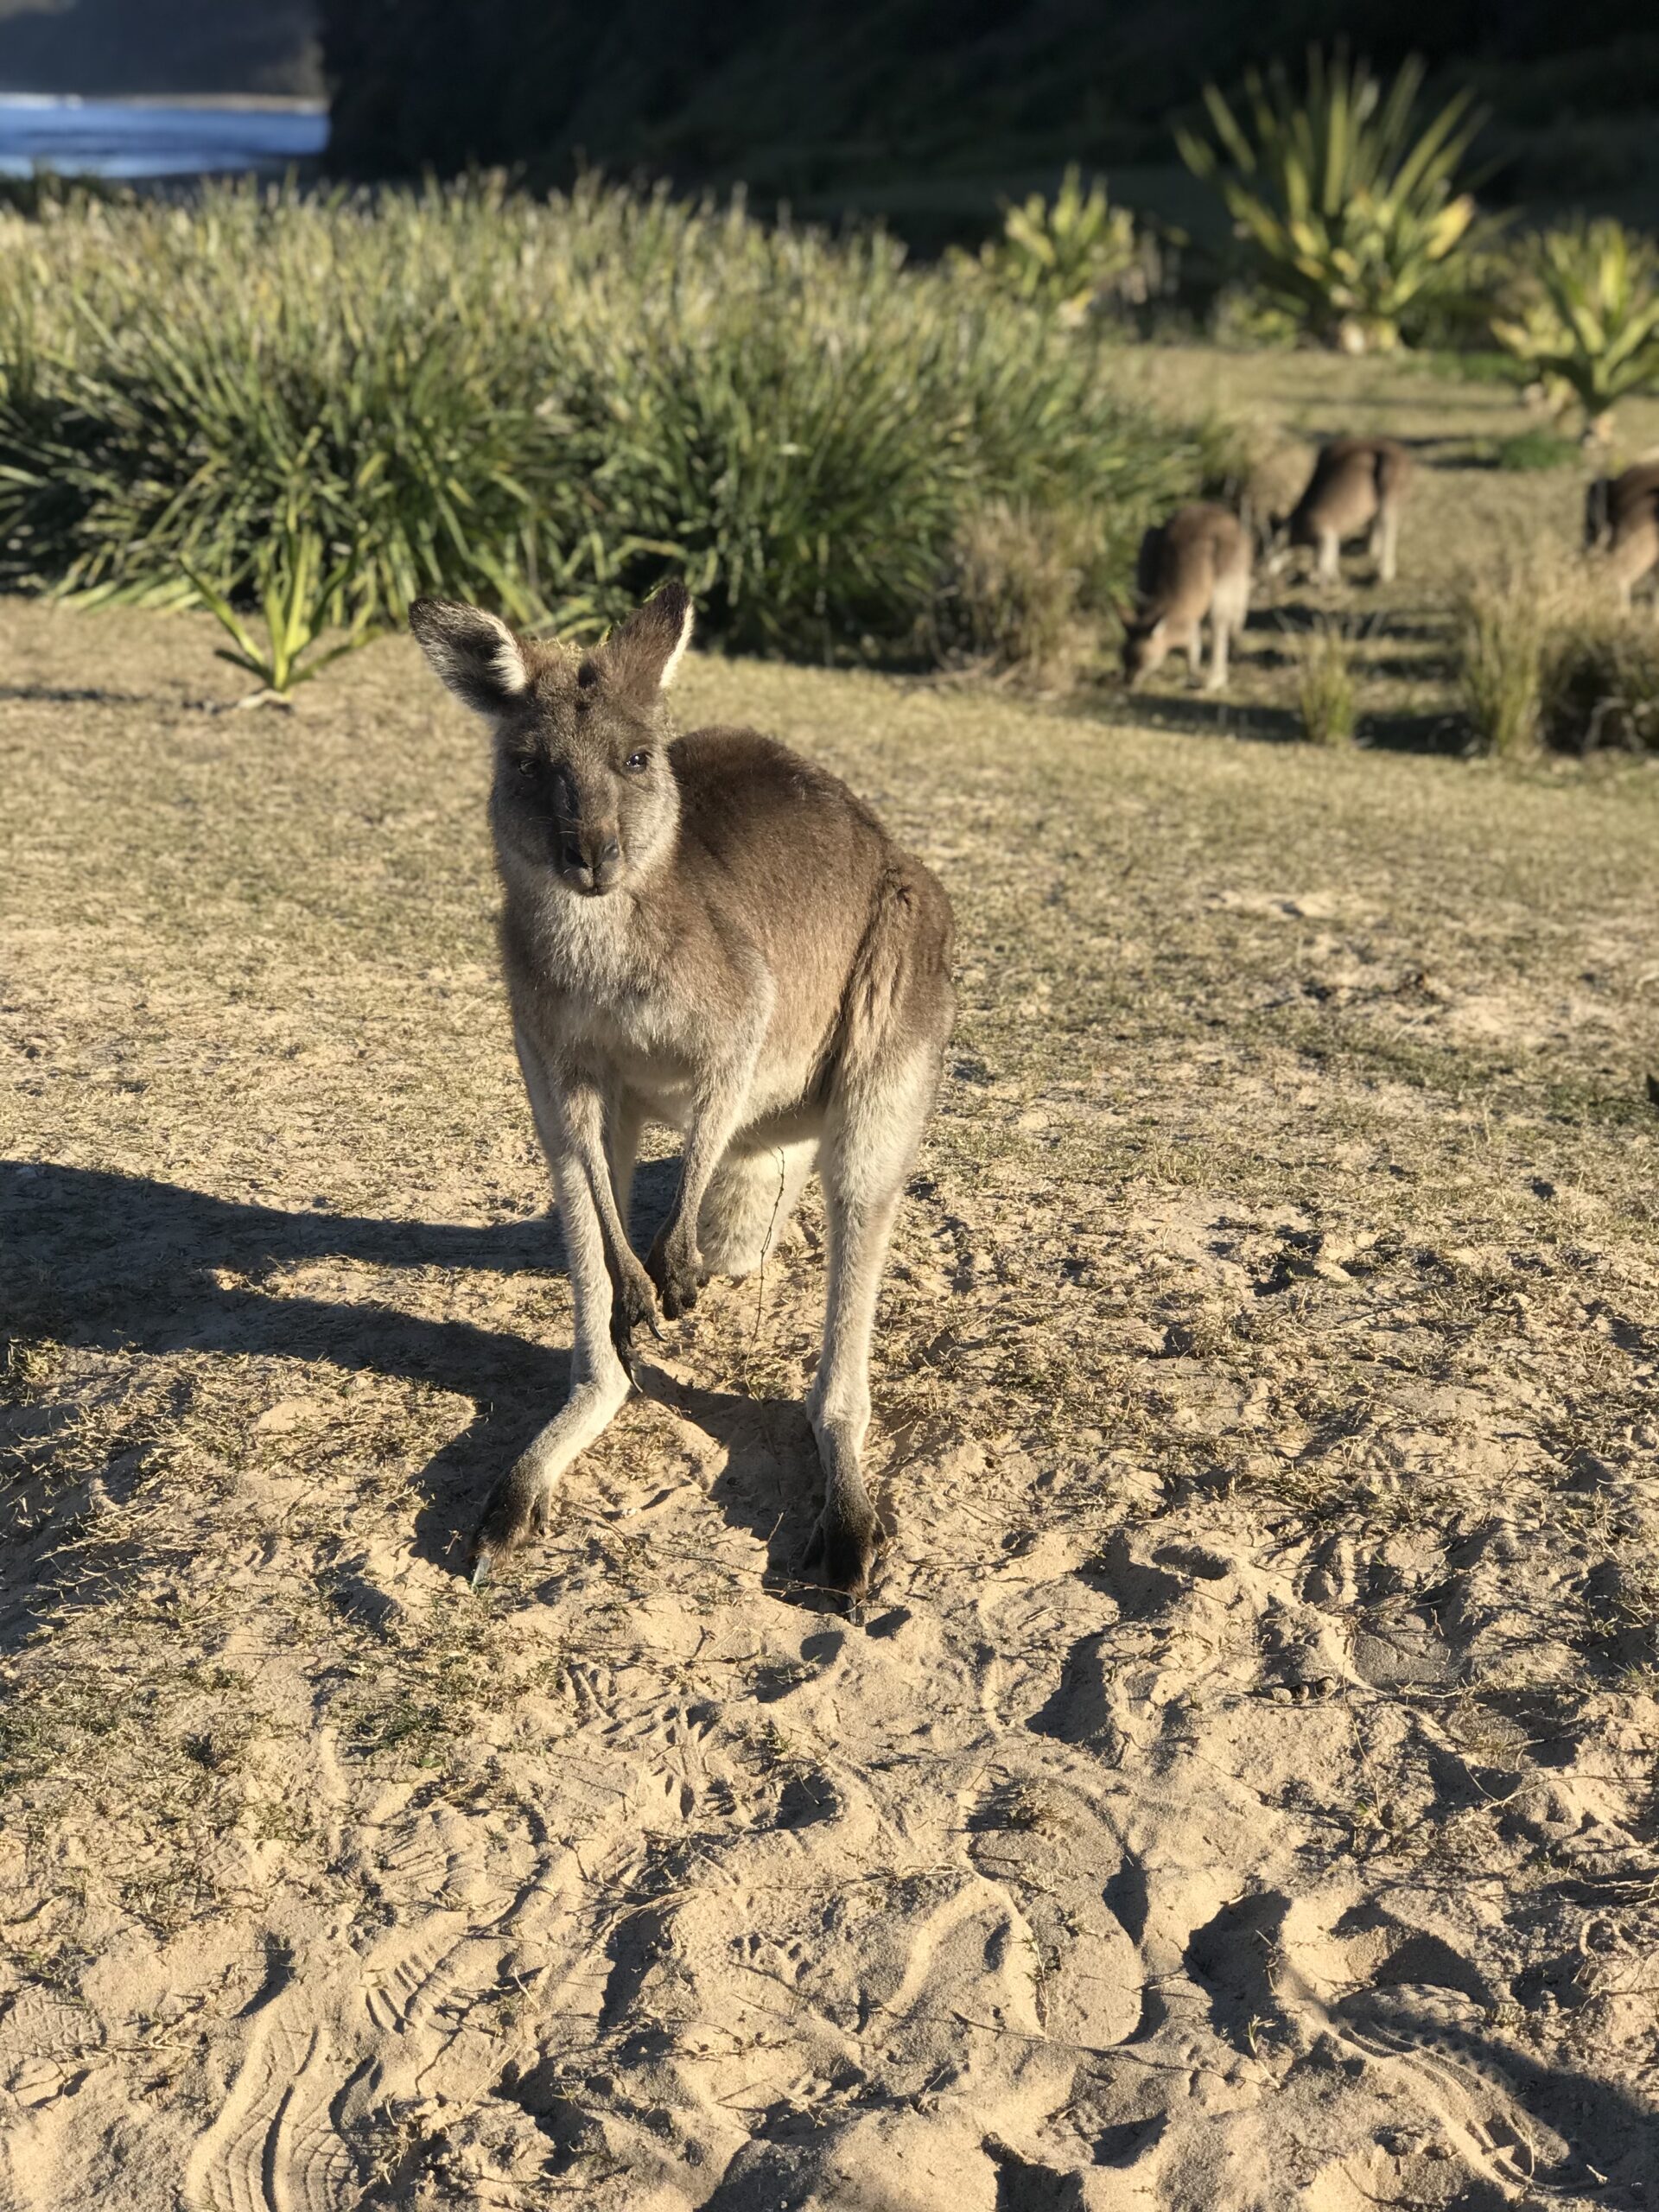 A visit to Australia would not be complete without seeing a Kangaroo.